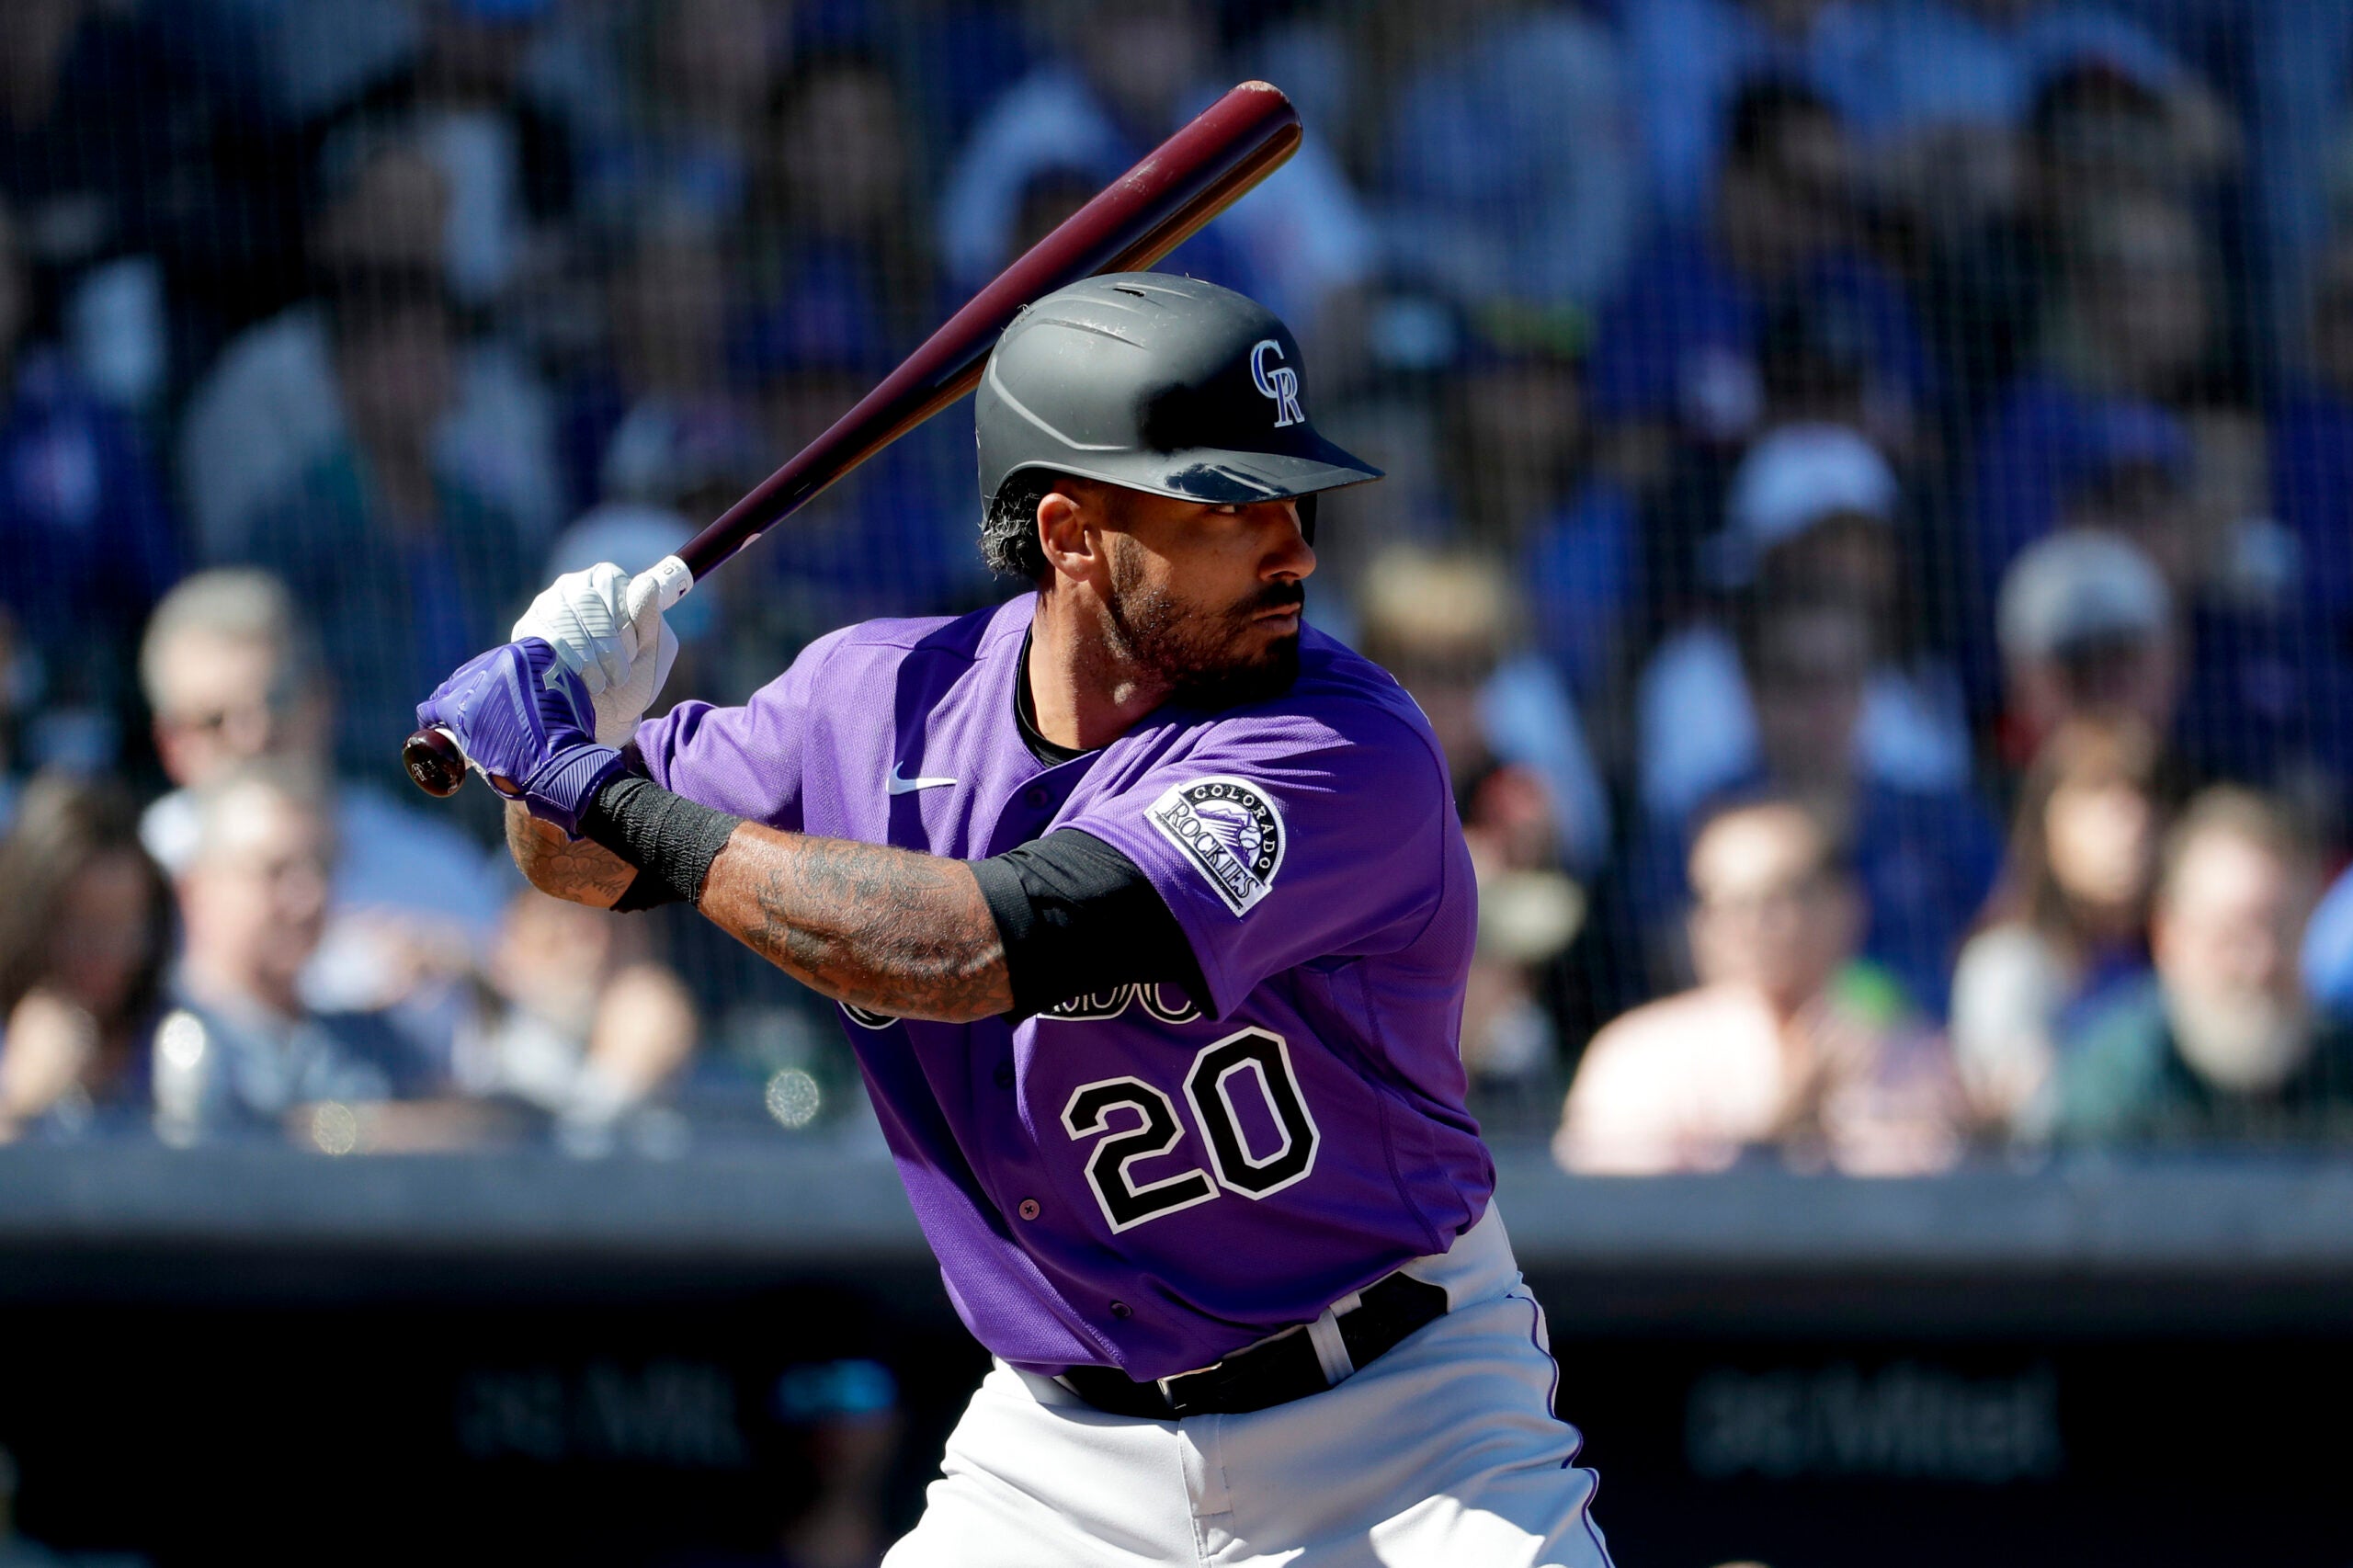 Rockies outfielder Ian Desmond decides to sit out this season